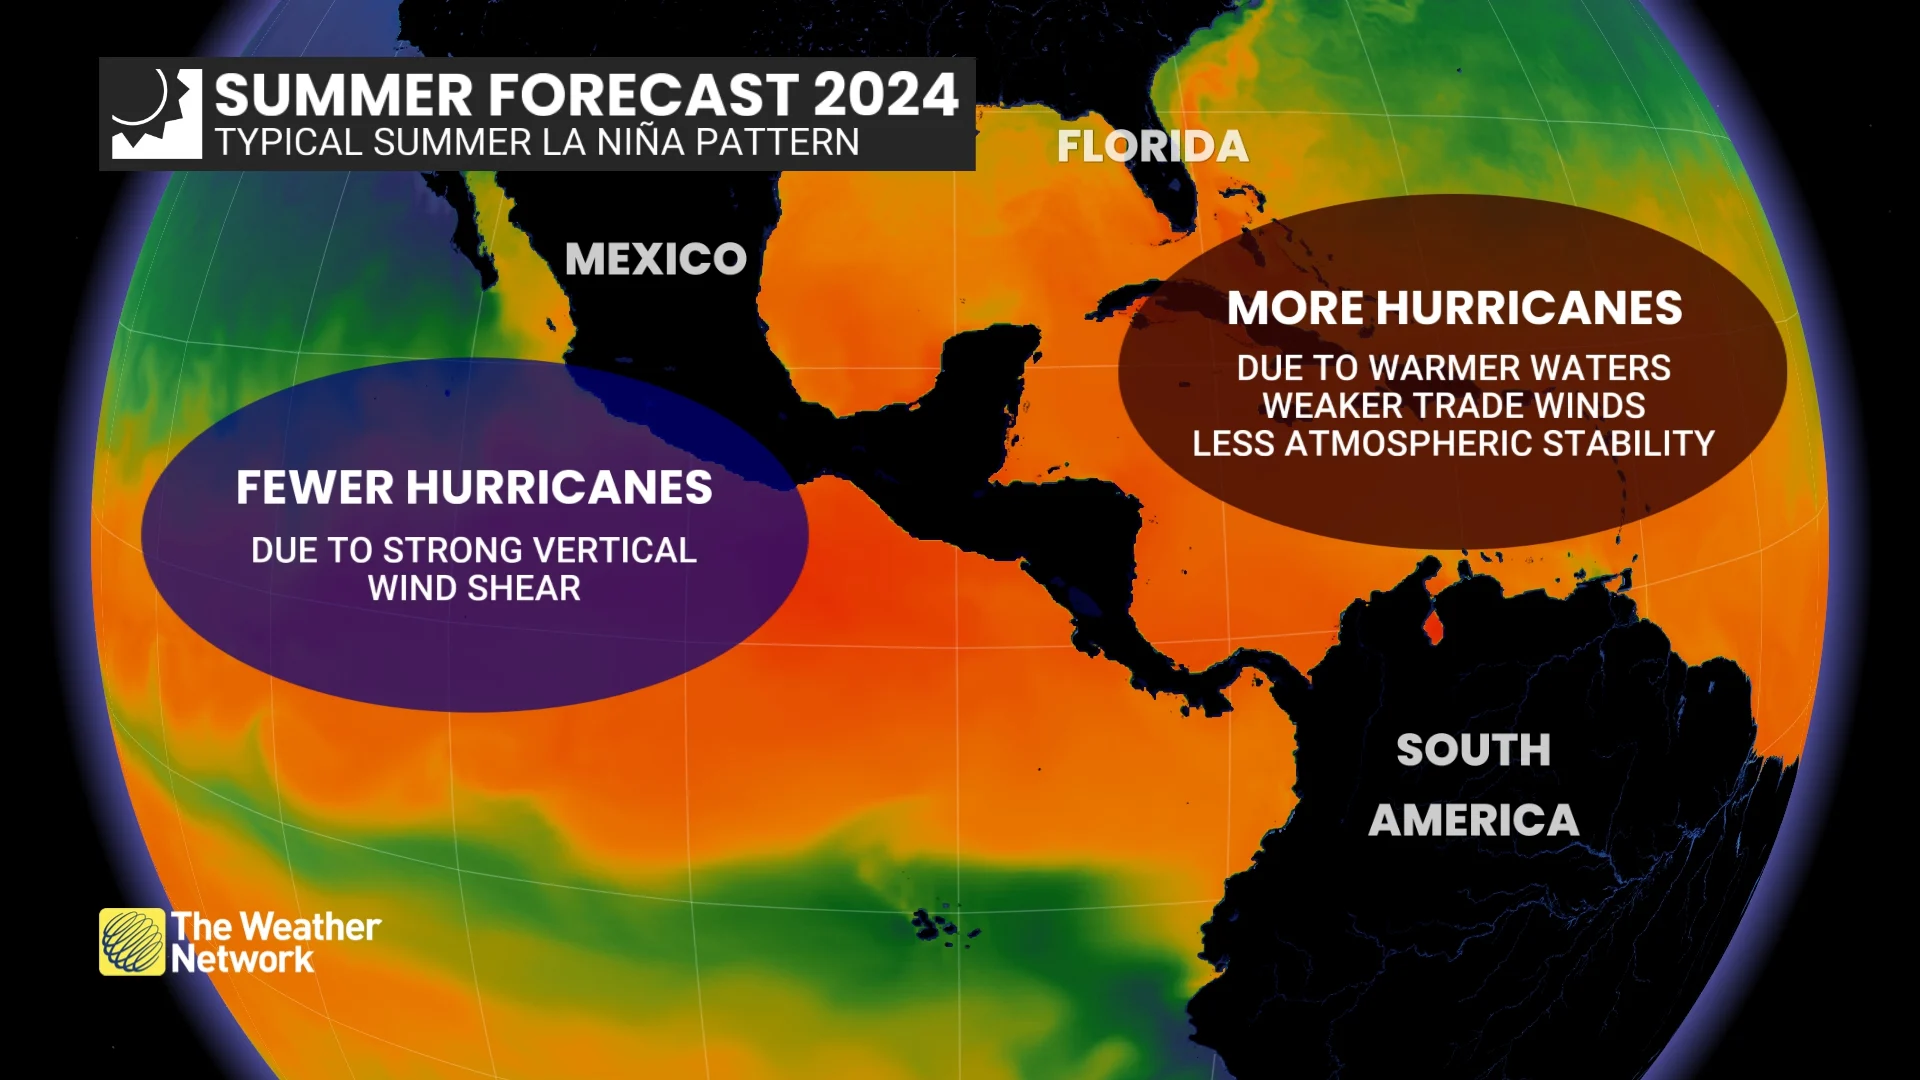 The Weather Network: Typical Summer Hurricane Pattern in a La Niña year